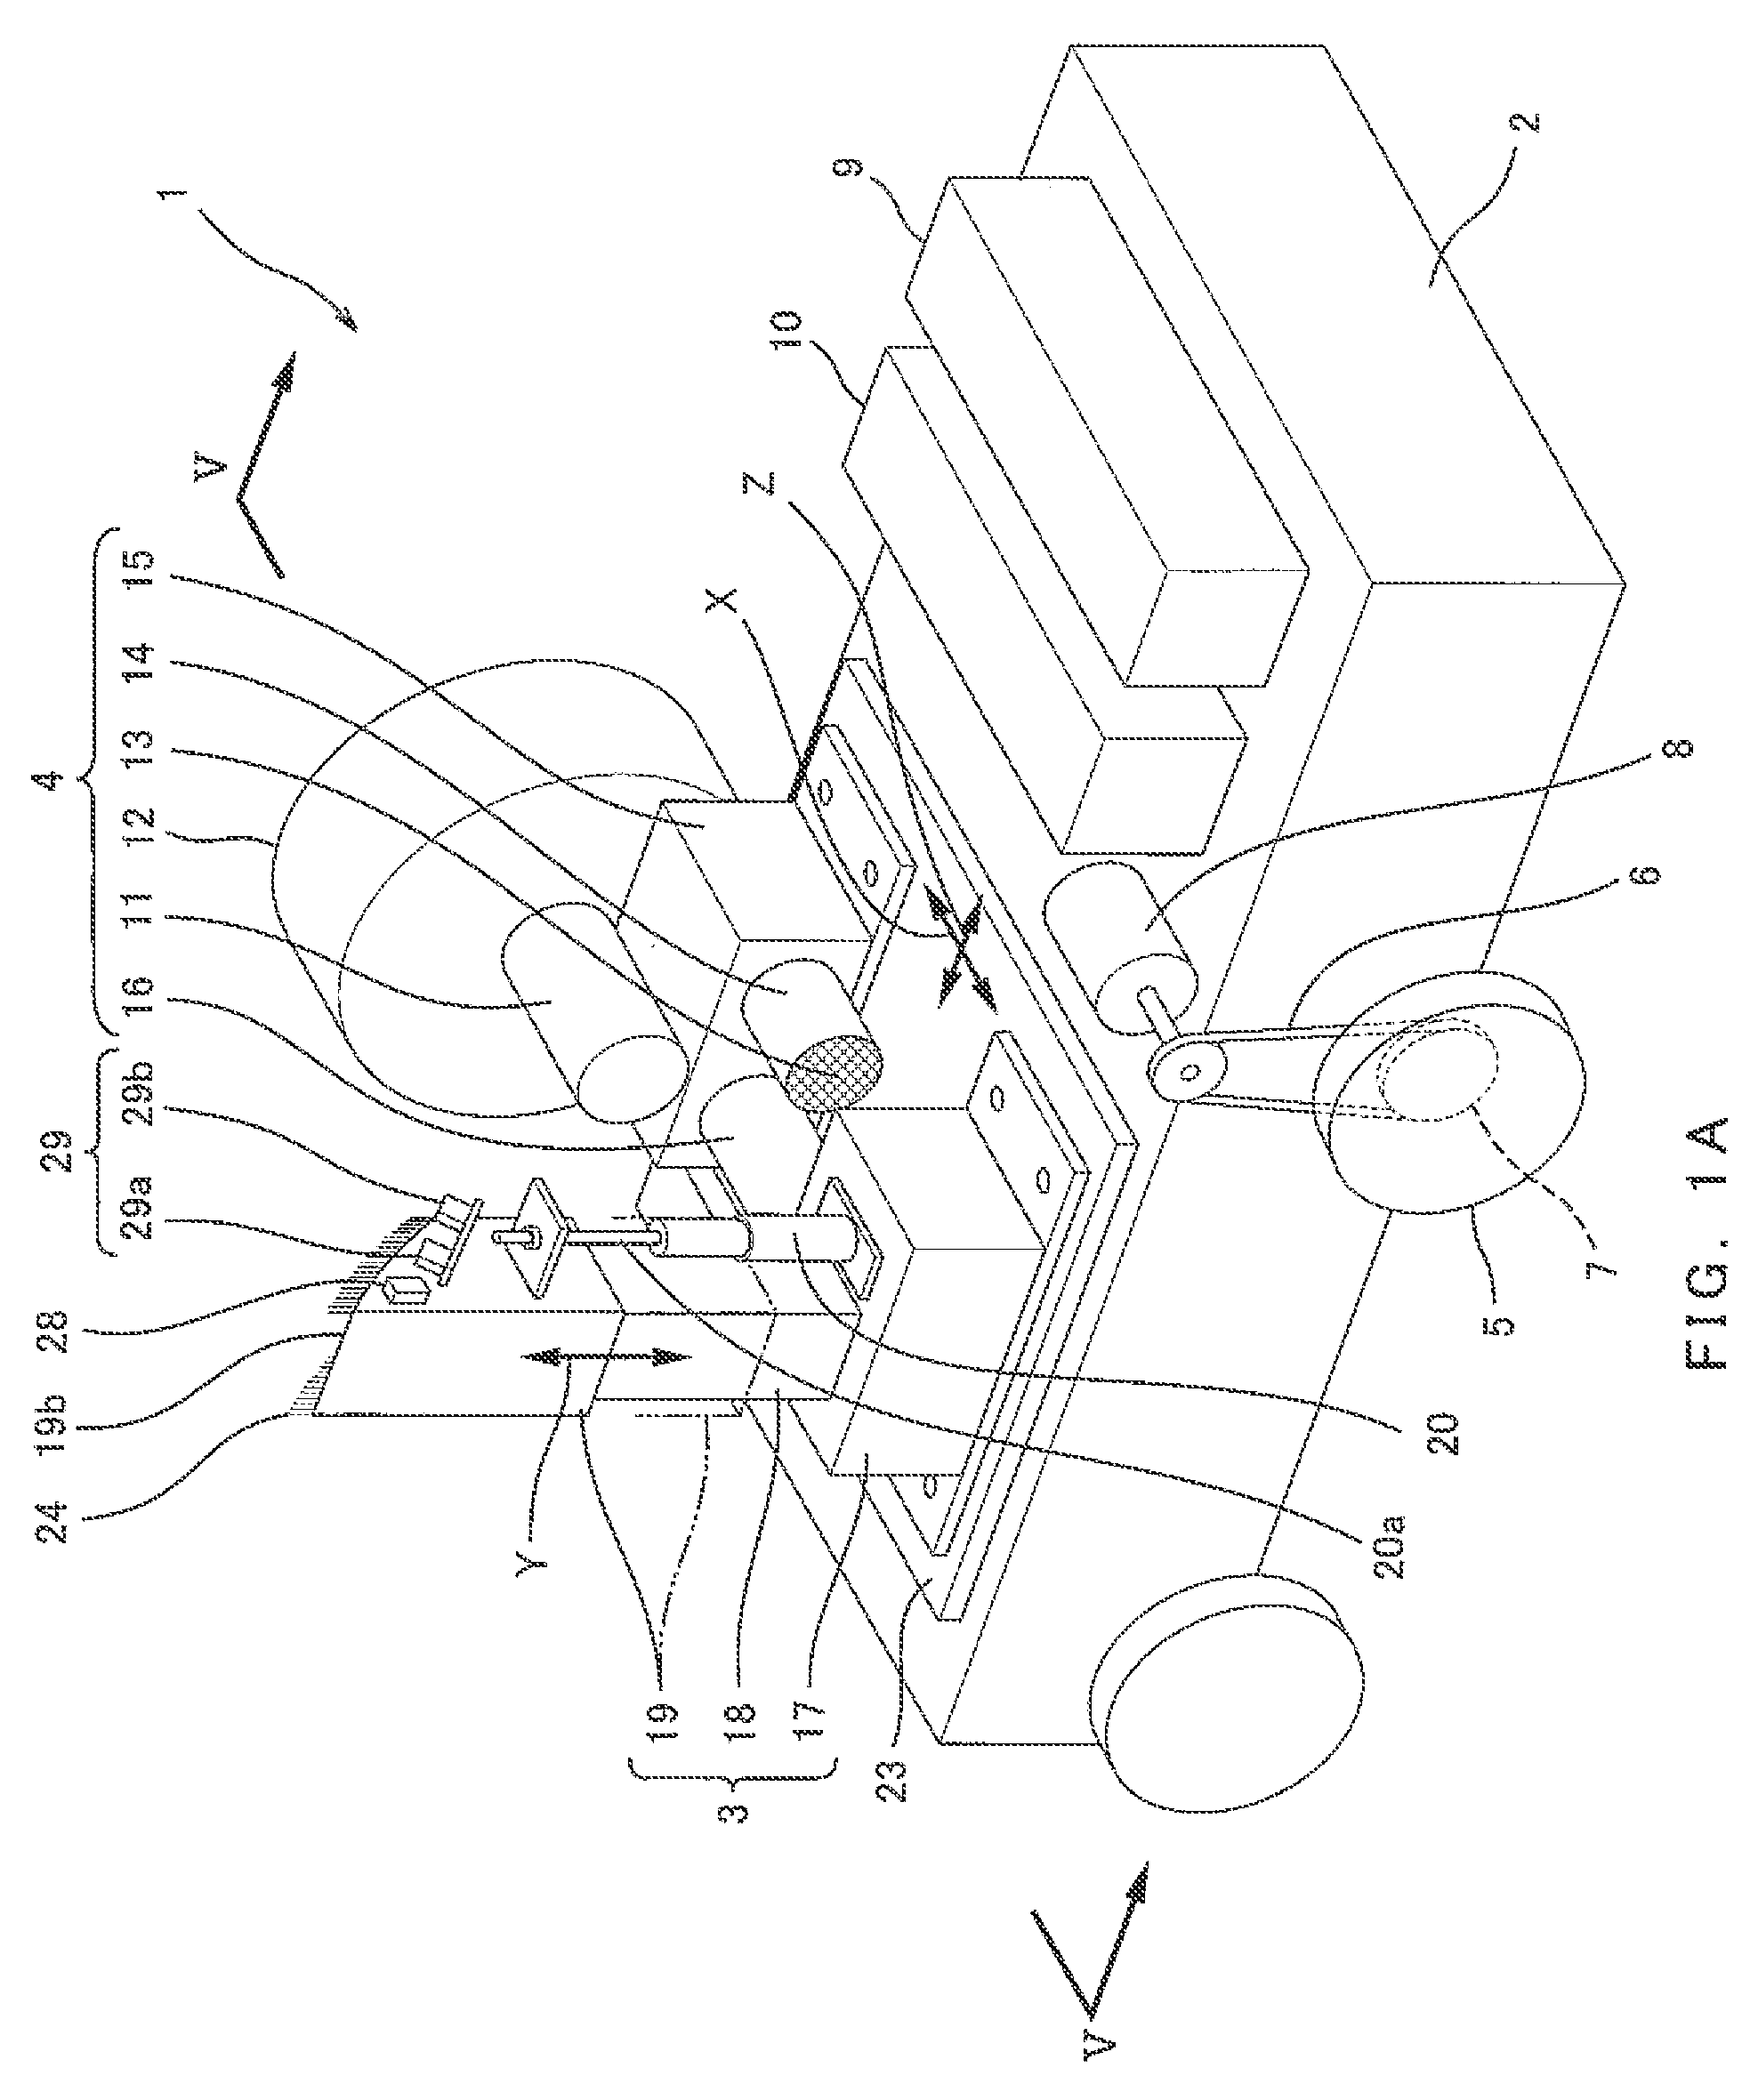 Cleaning device for sunlight collecting devices in a solar thermal electric power generation system